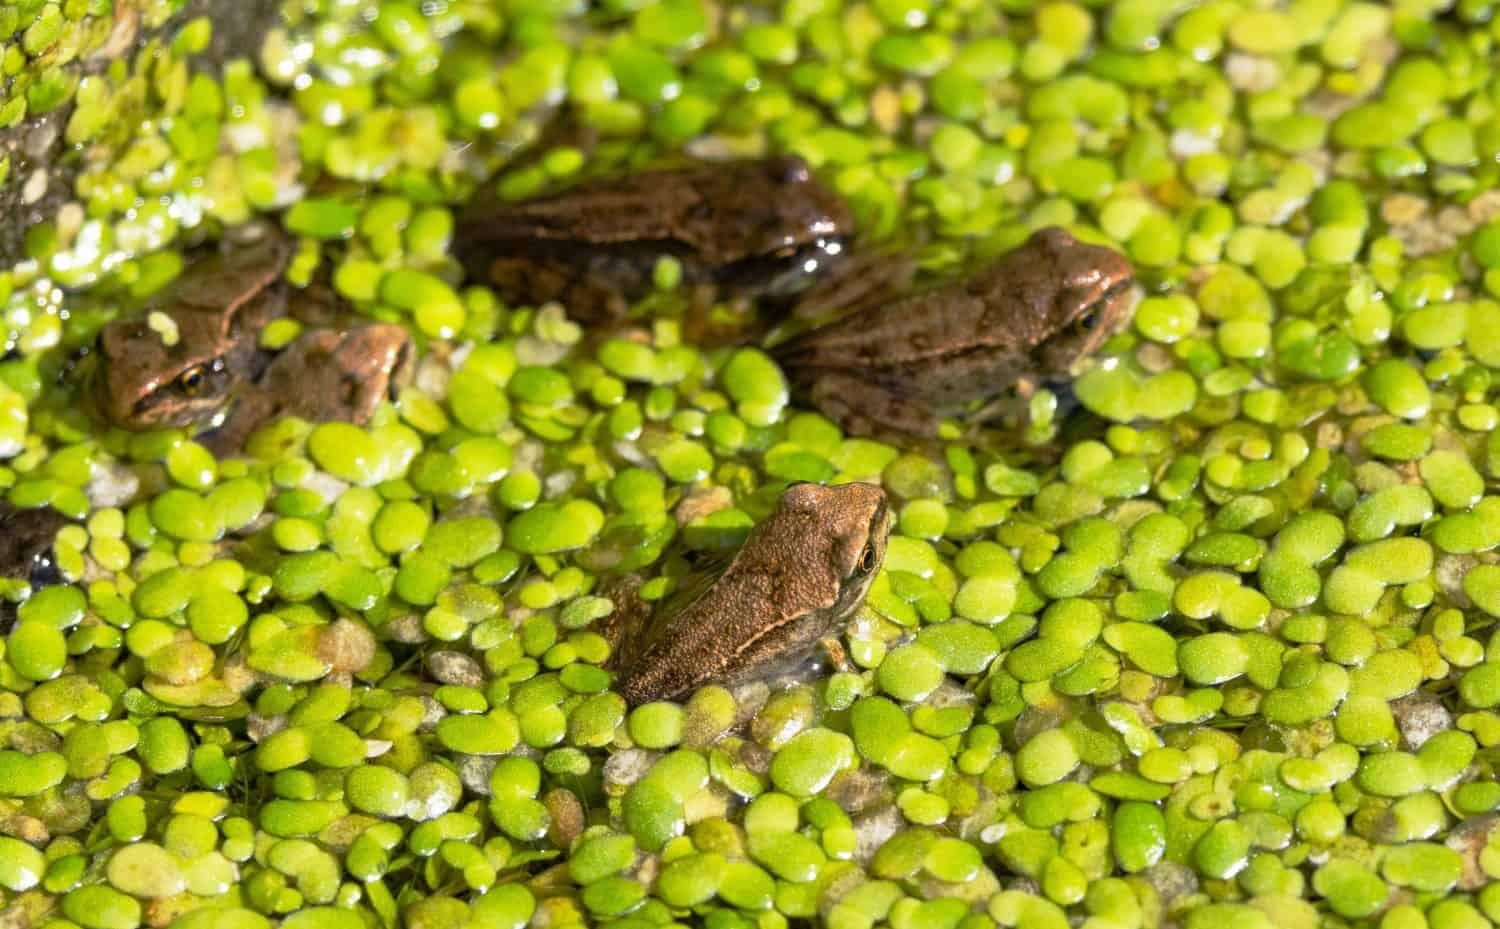 In late spring tiny Common Frogs start to emerge having completed their metamorphosis from aquatic tadpoles. They can now obtain oxygen from lungs and through their skin.